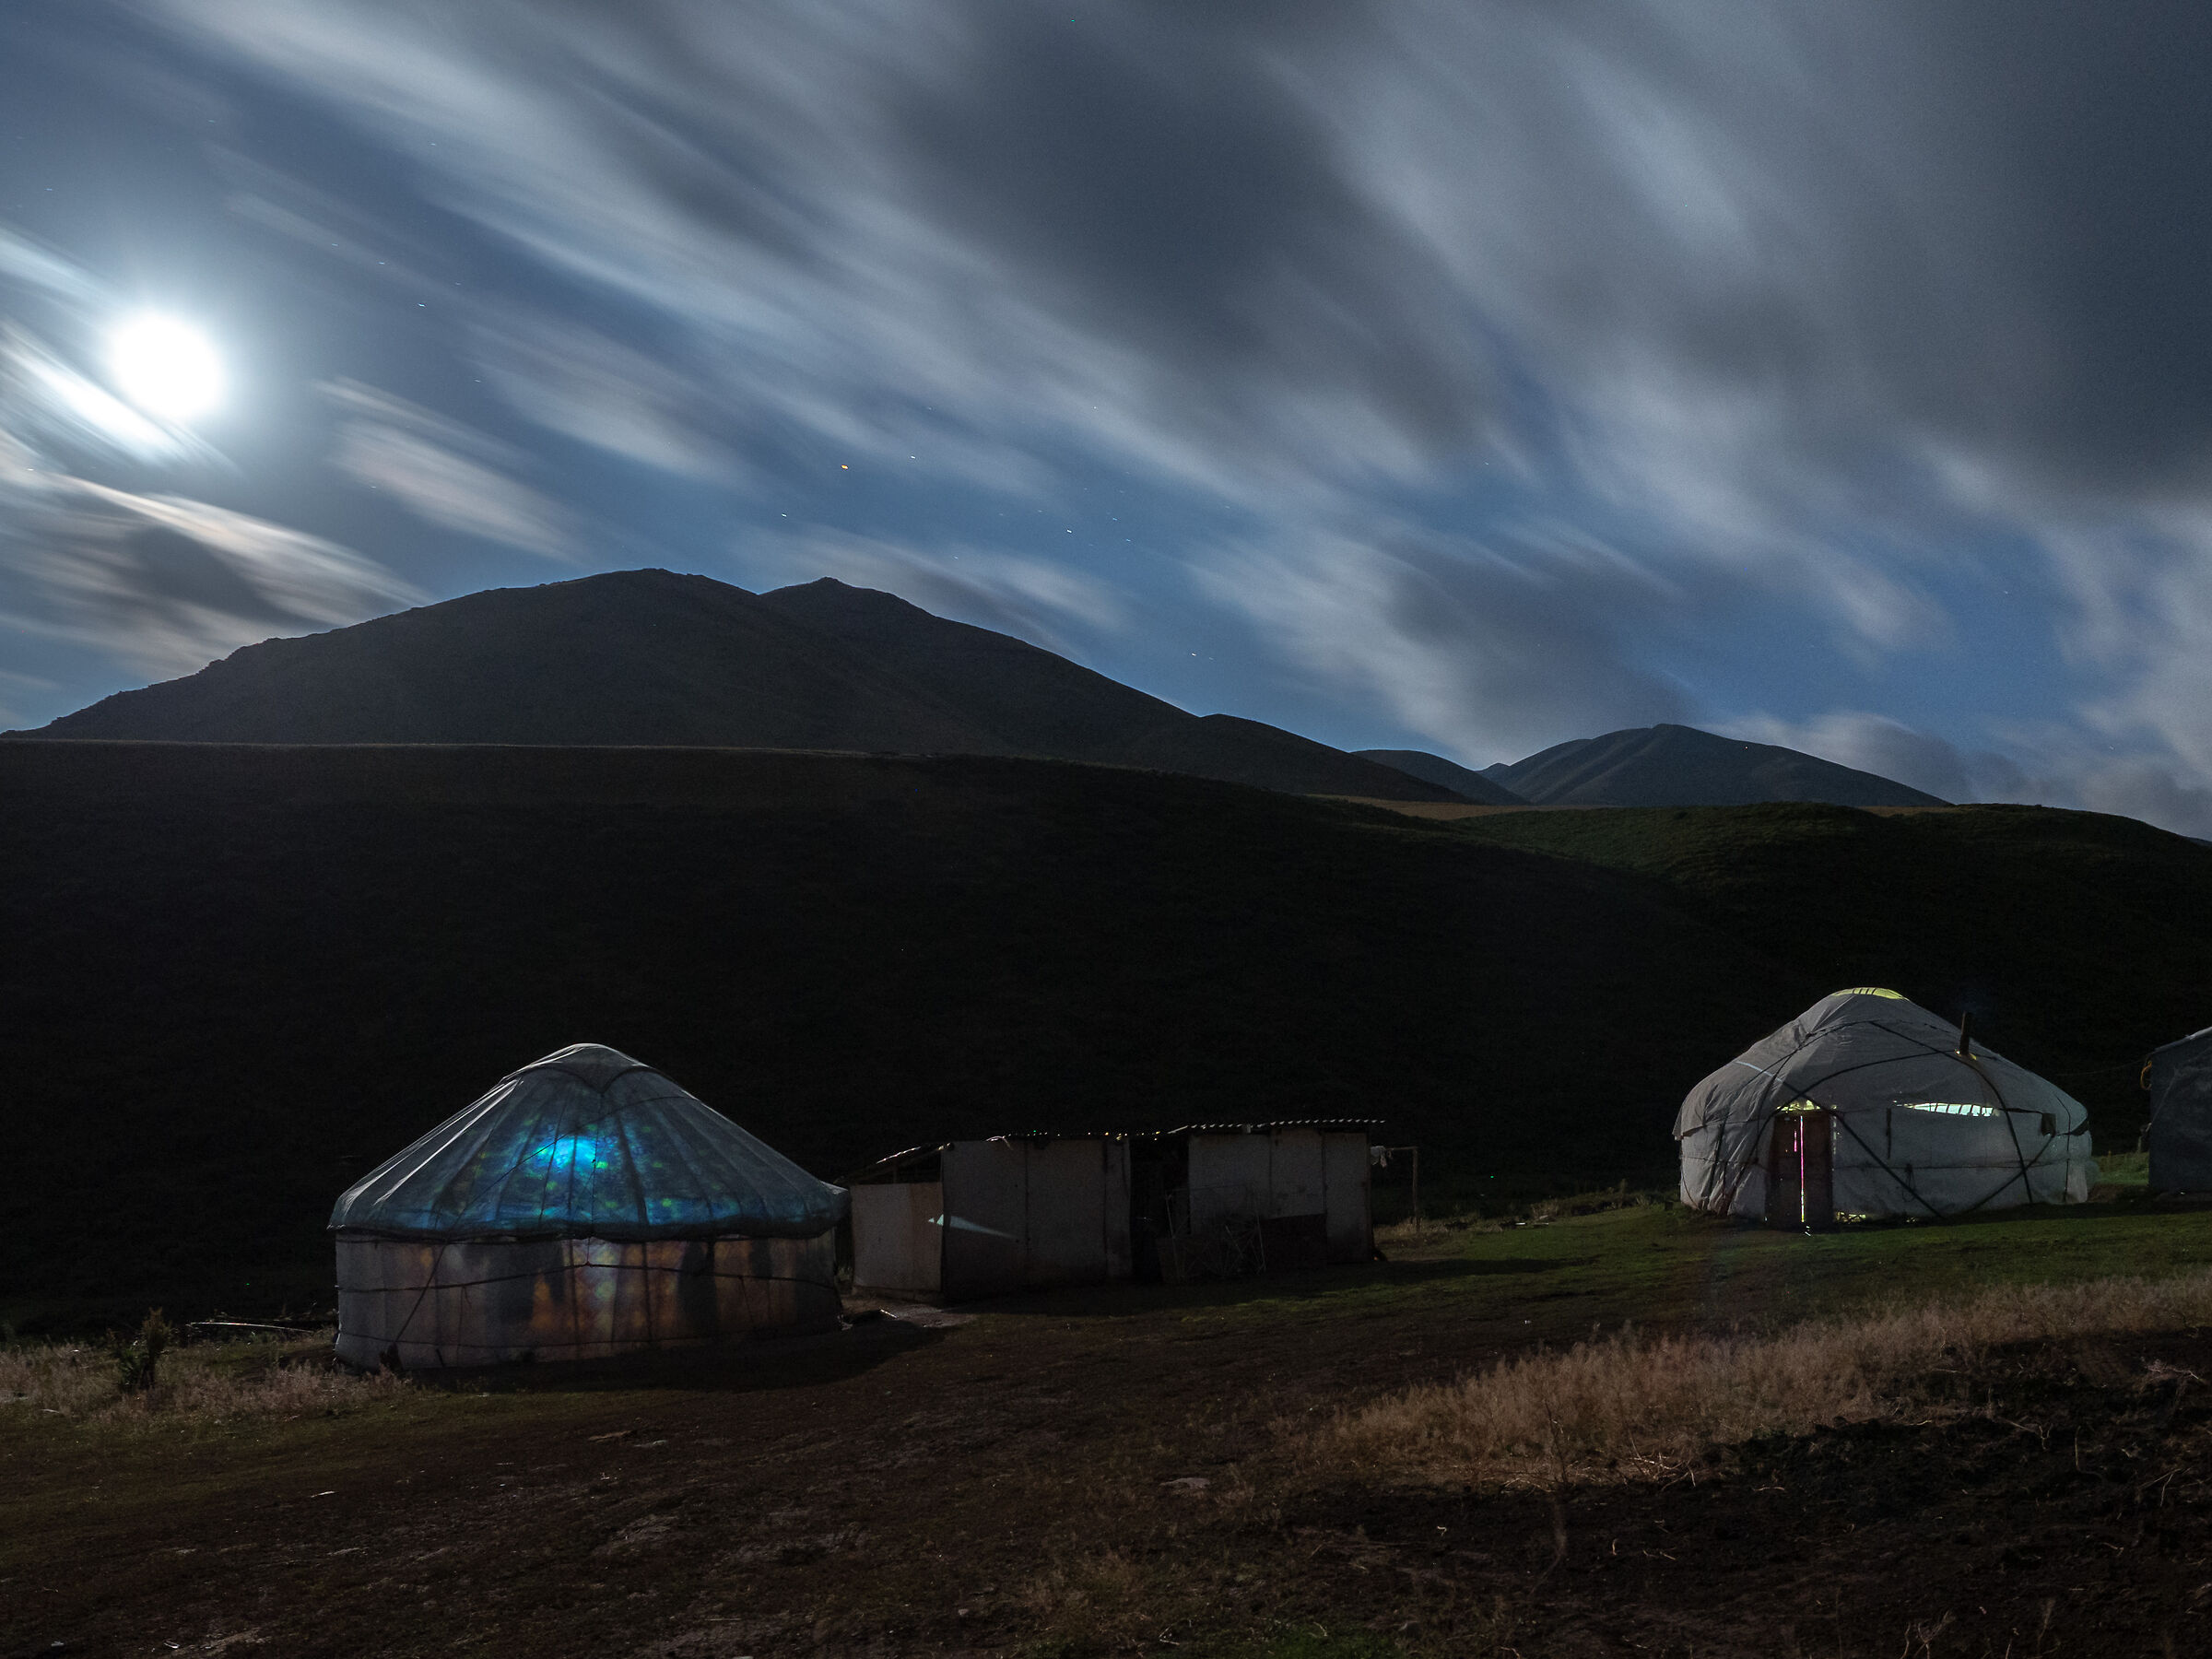 Yurts in the moonlight...